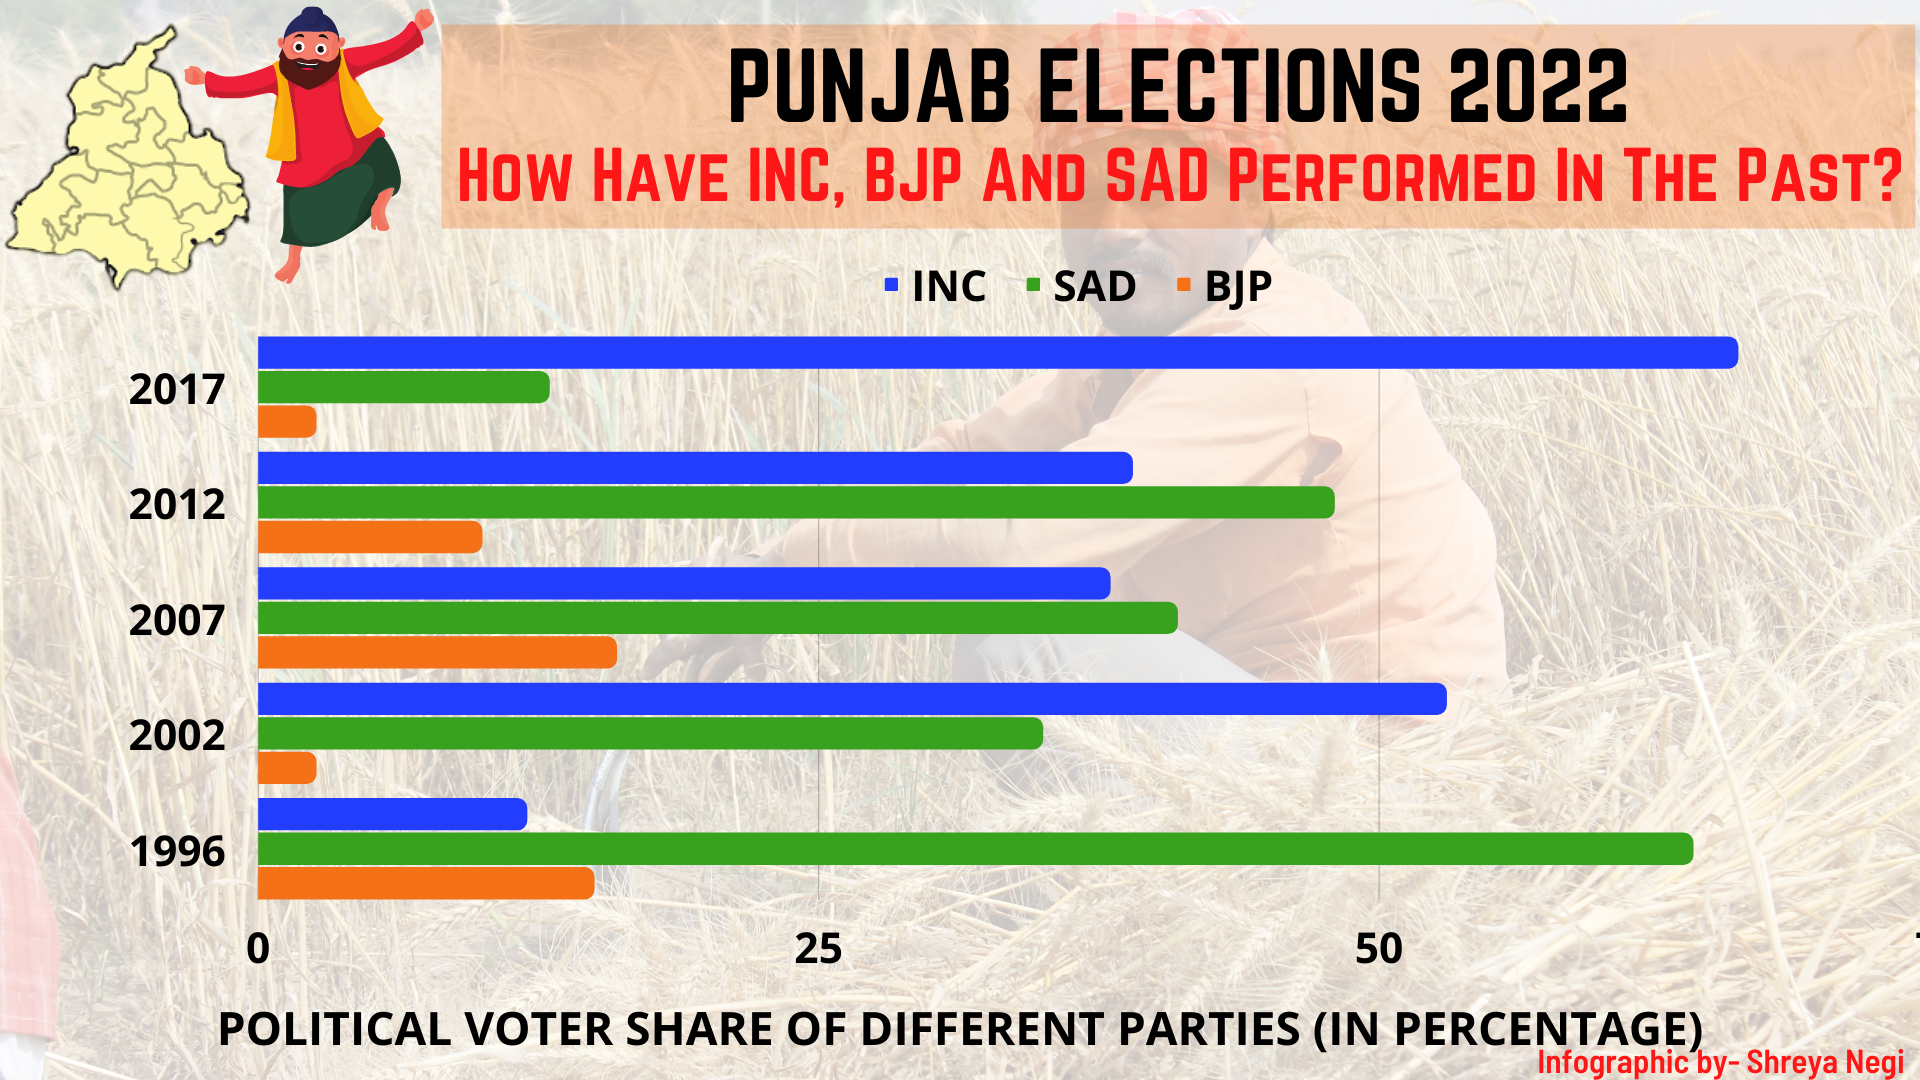 How have INC, BJP and SAD performed in the past?